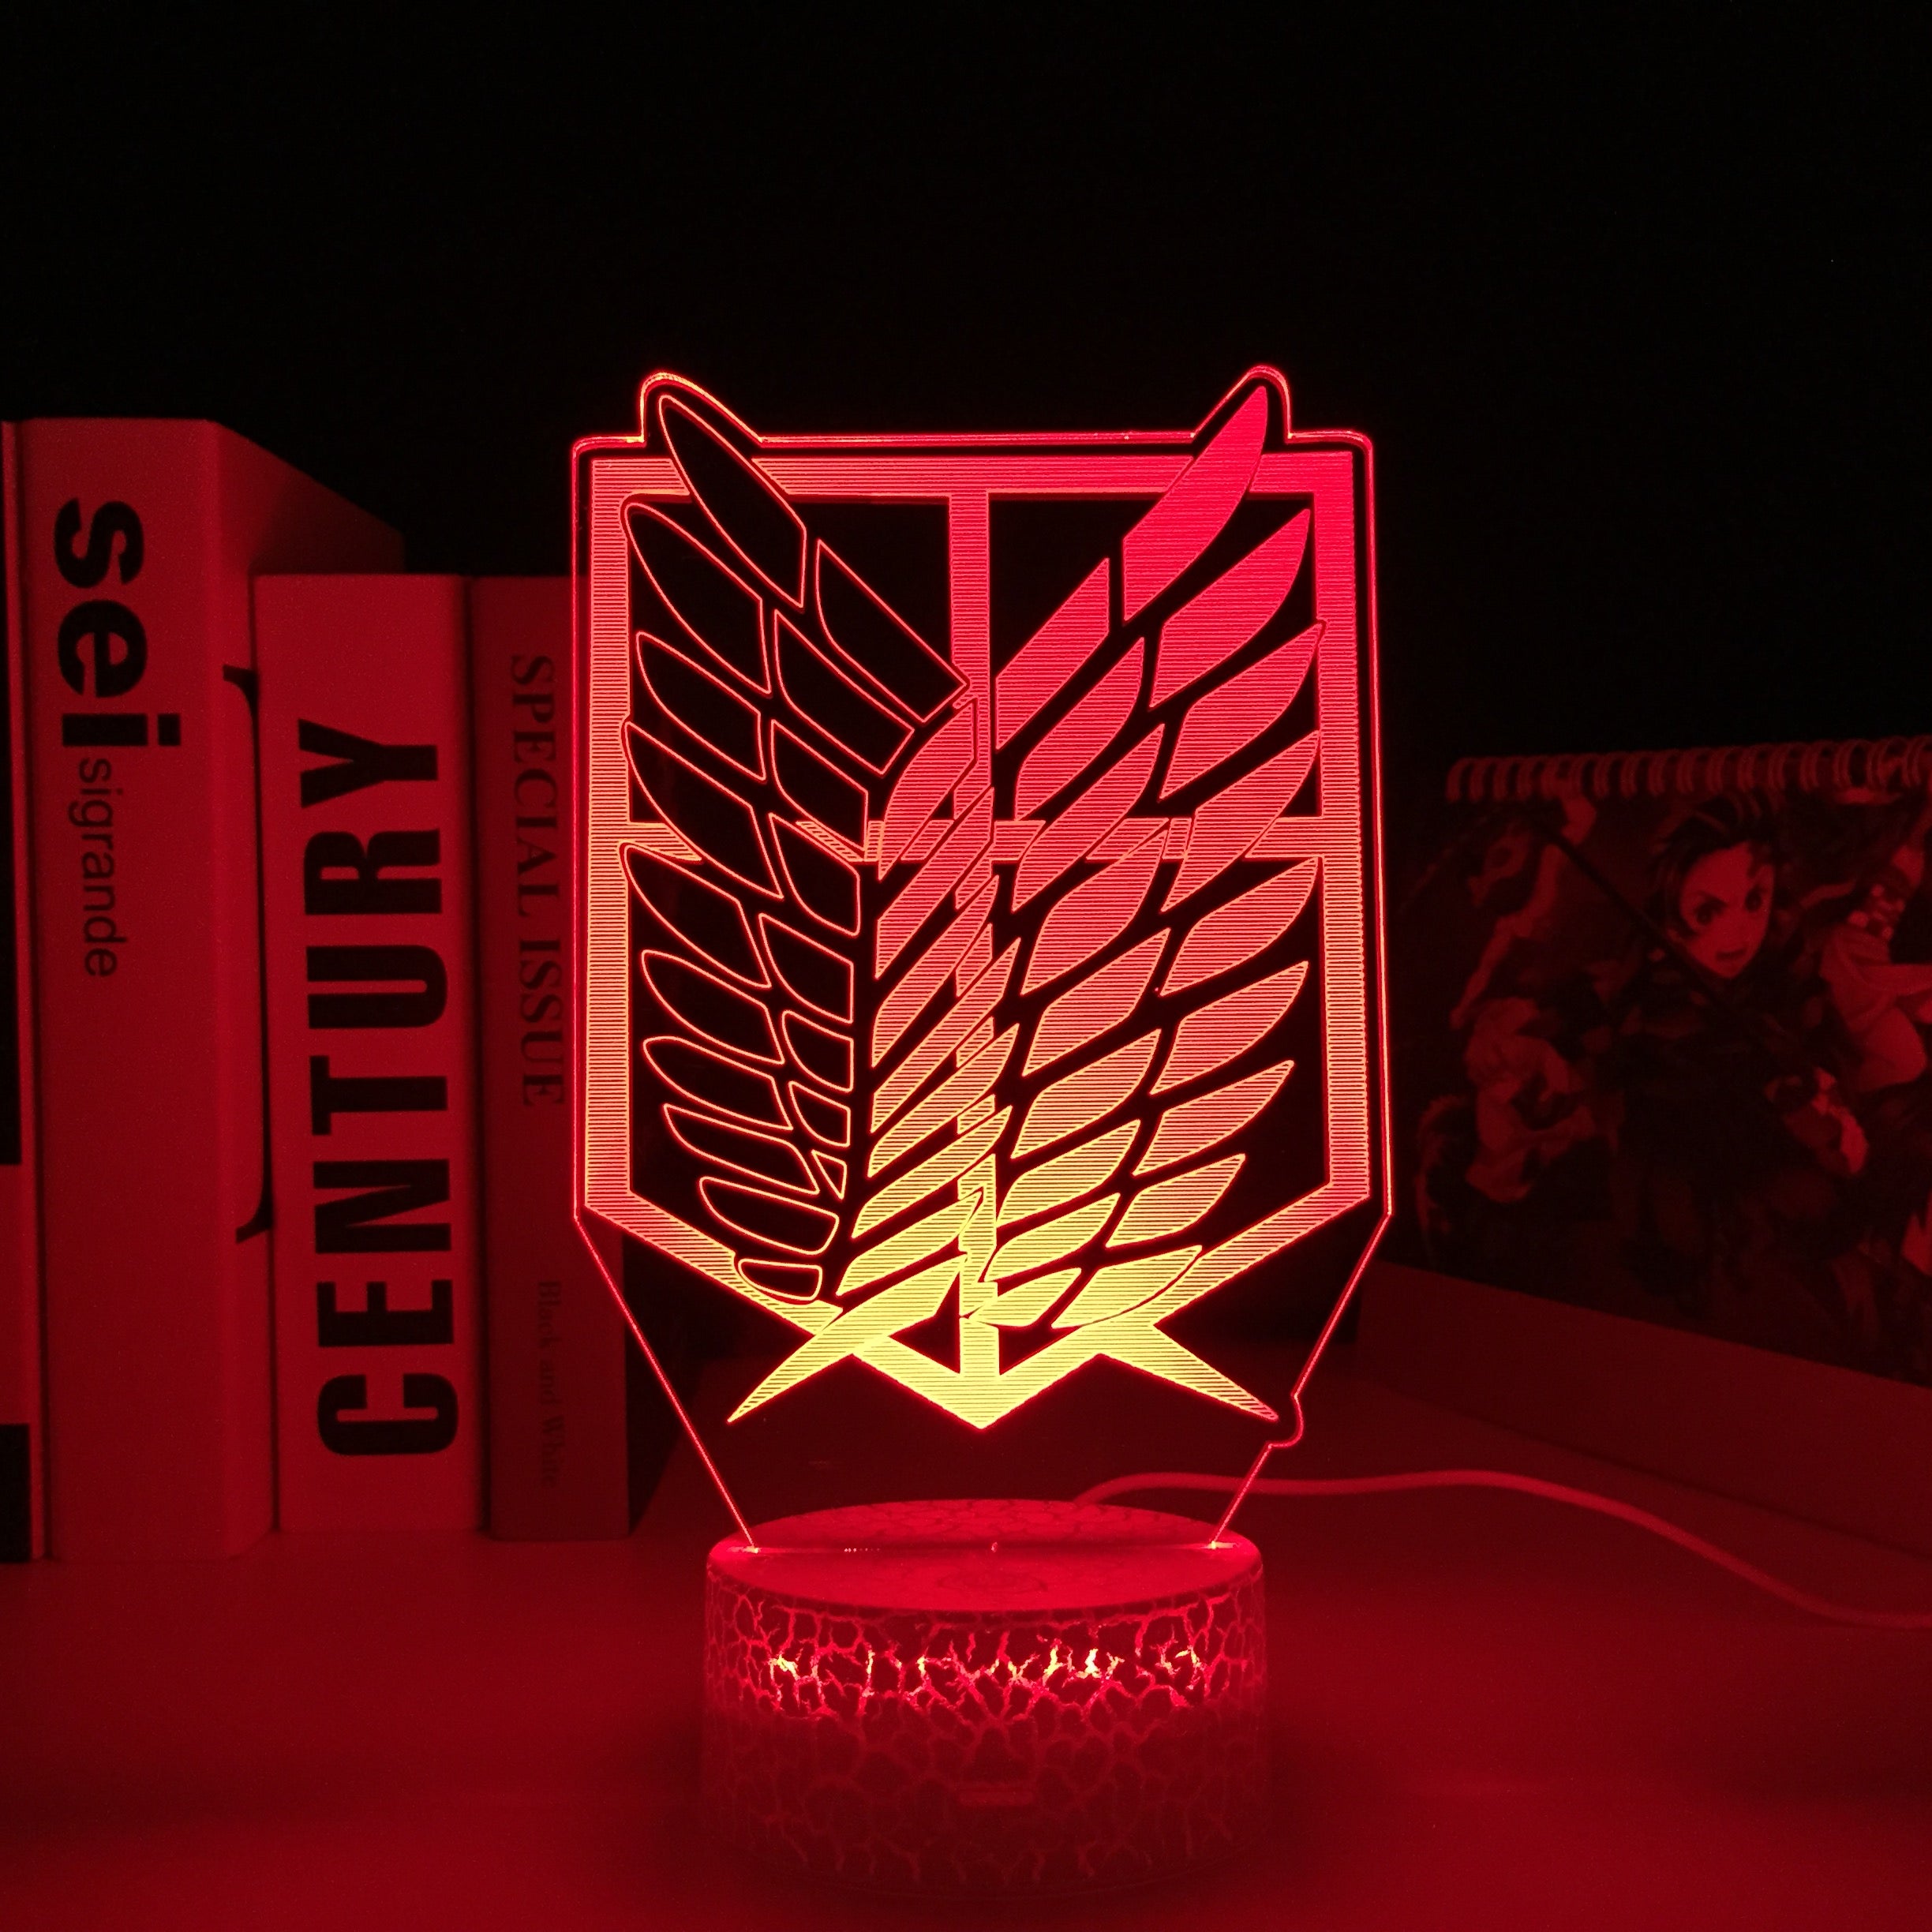 Attack on Titan Anime Figure LED Light Scout Regiment for Child Birthday Gift Kid Bedroom Decoration Manga 3D Table Lamp